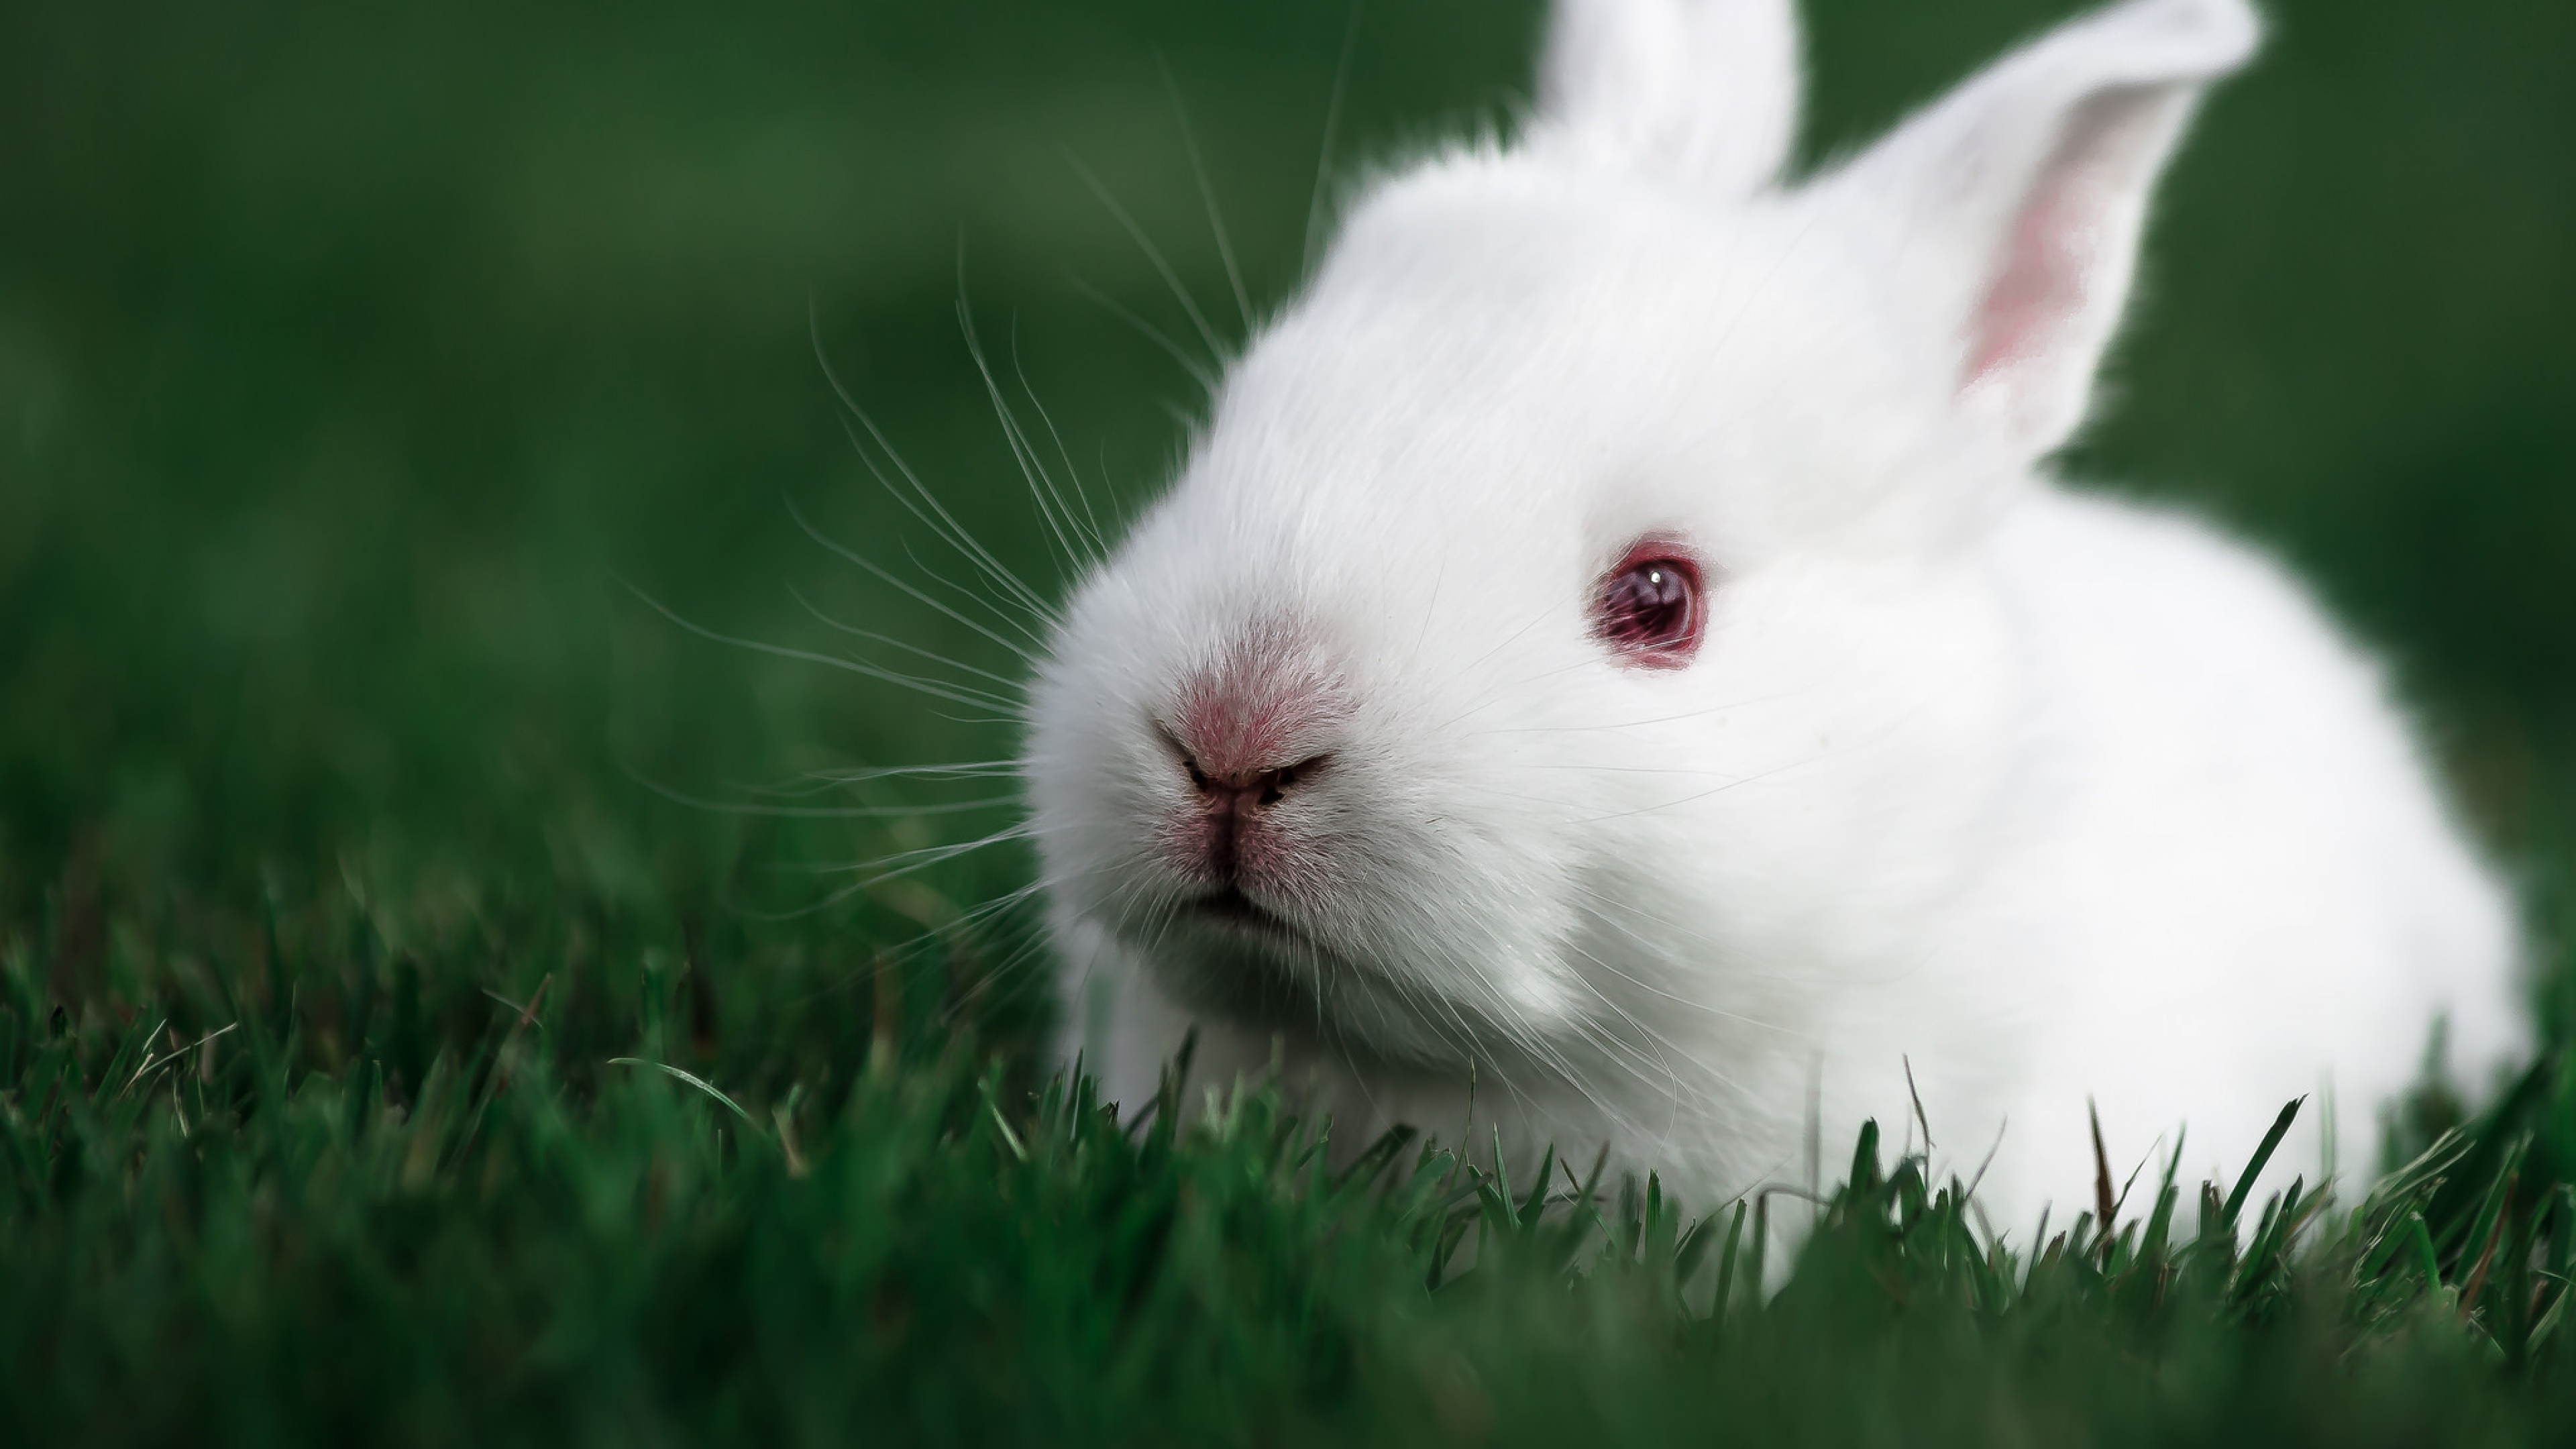 Cute rabbit hd animals k wallpapers images backgrounds photos and pictures